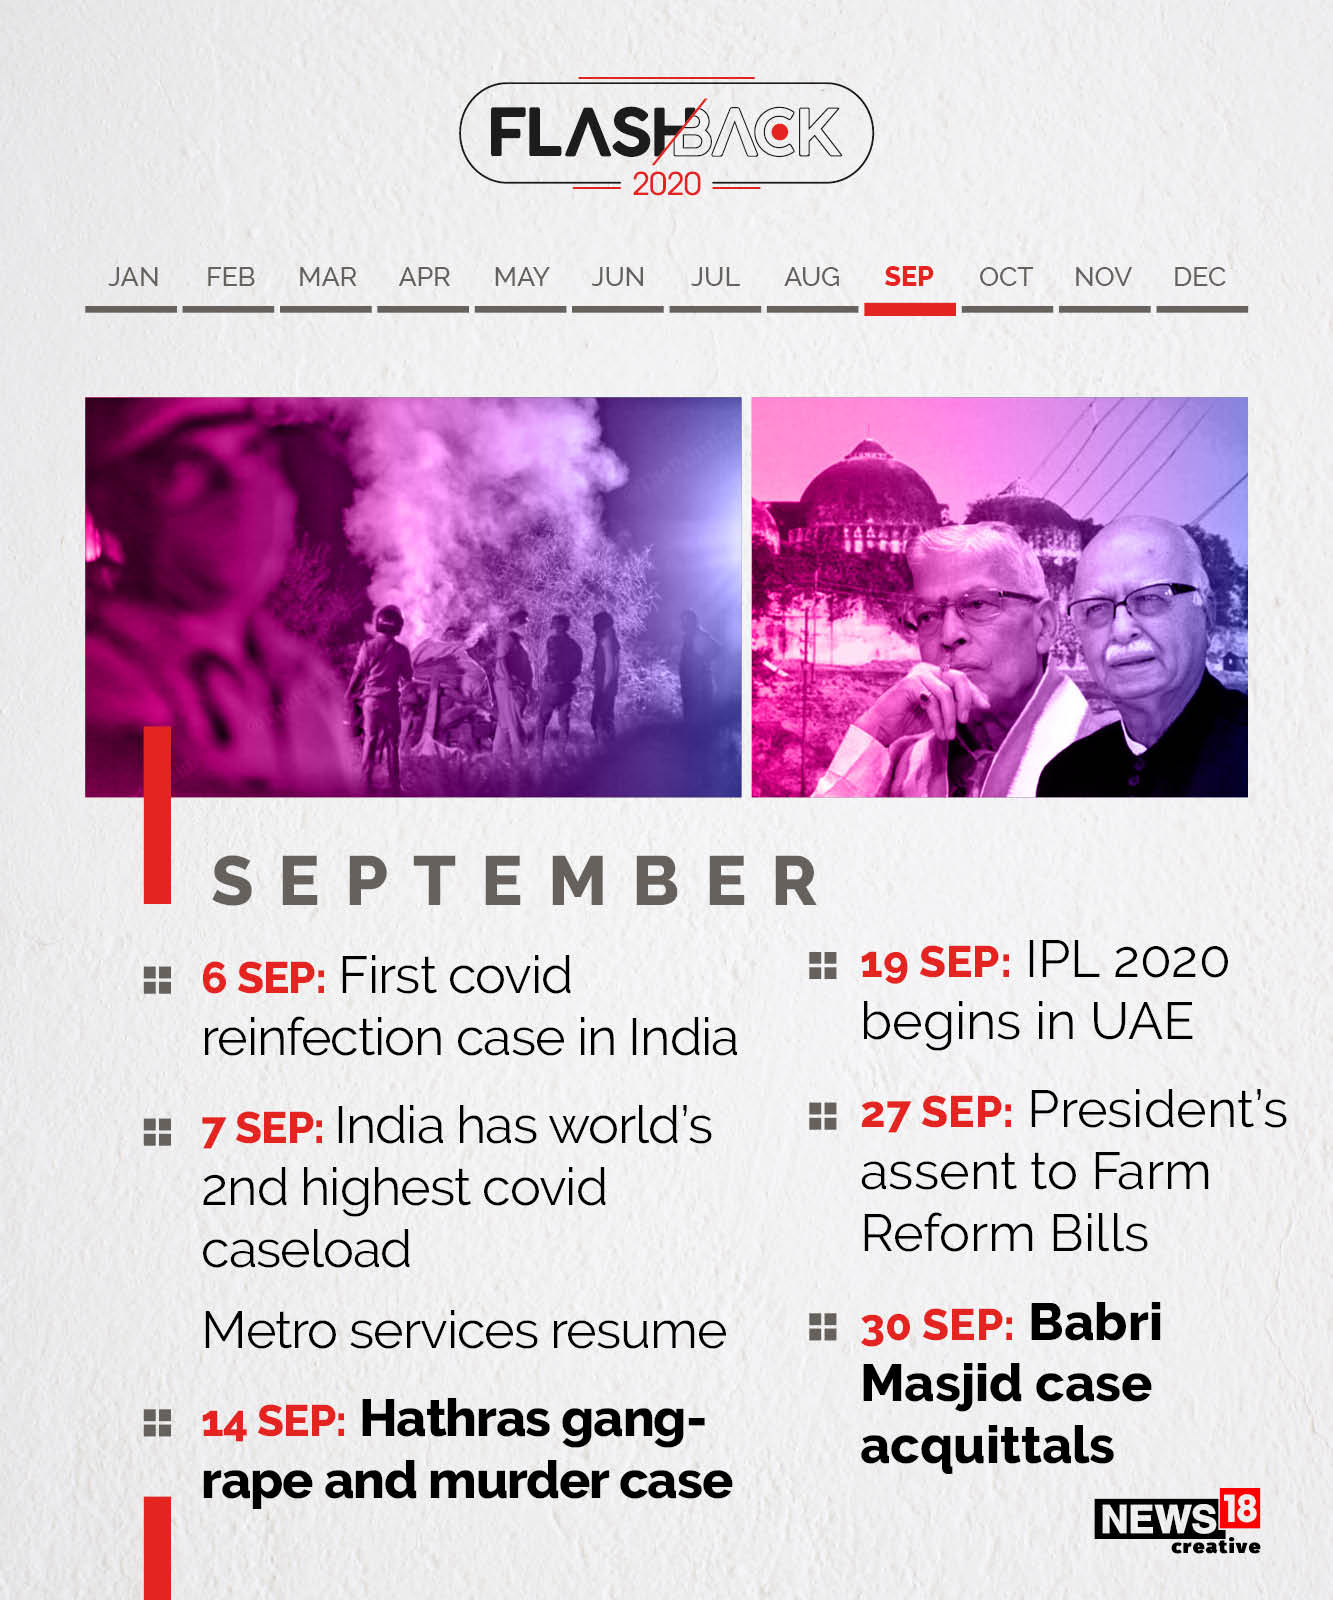 Forbes India 2020 Rewind: The year that was, India edition